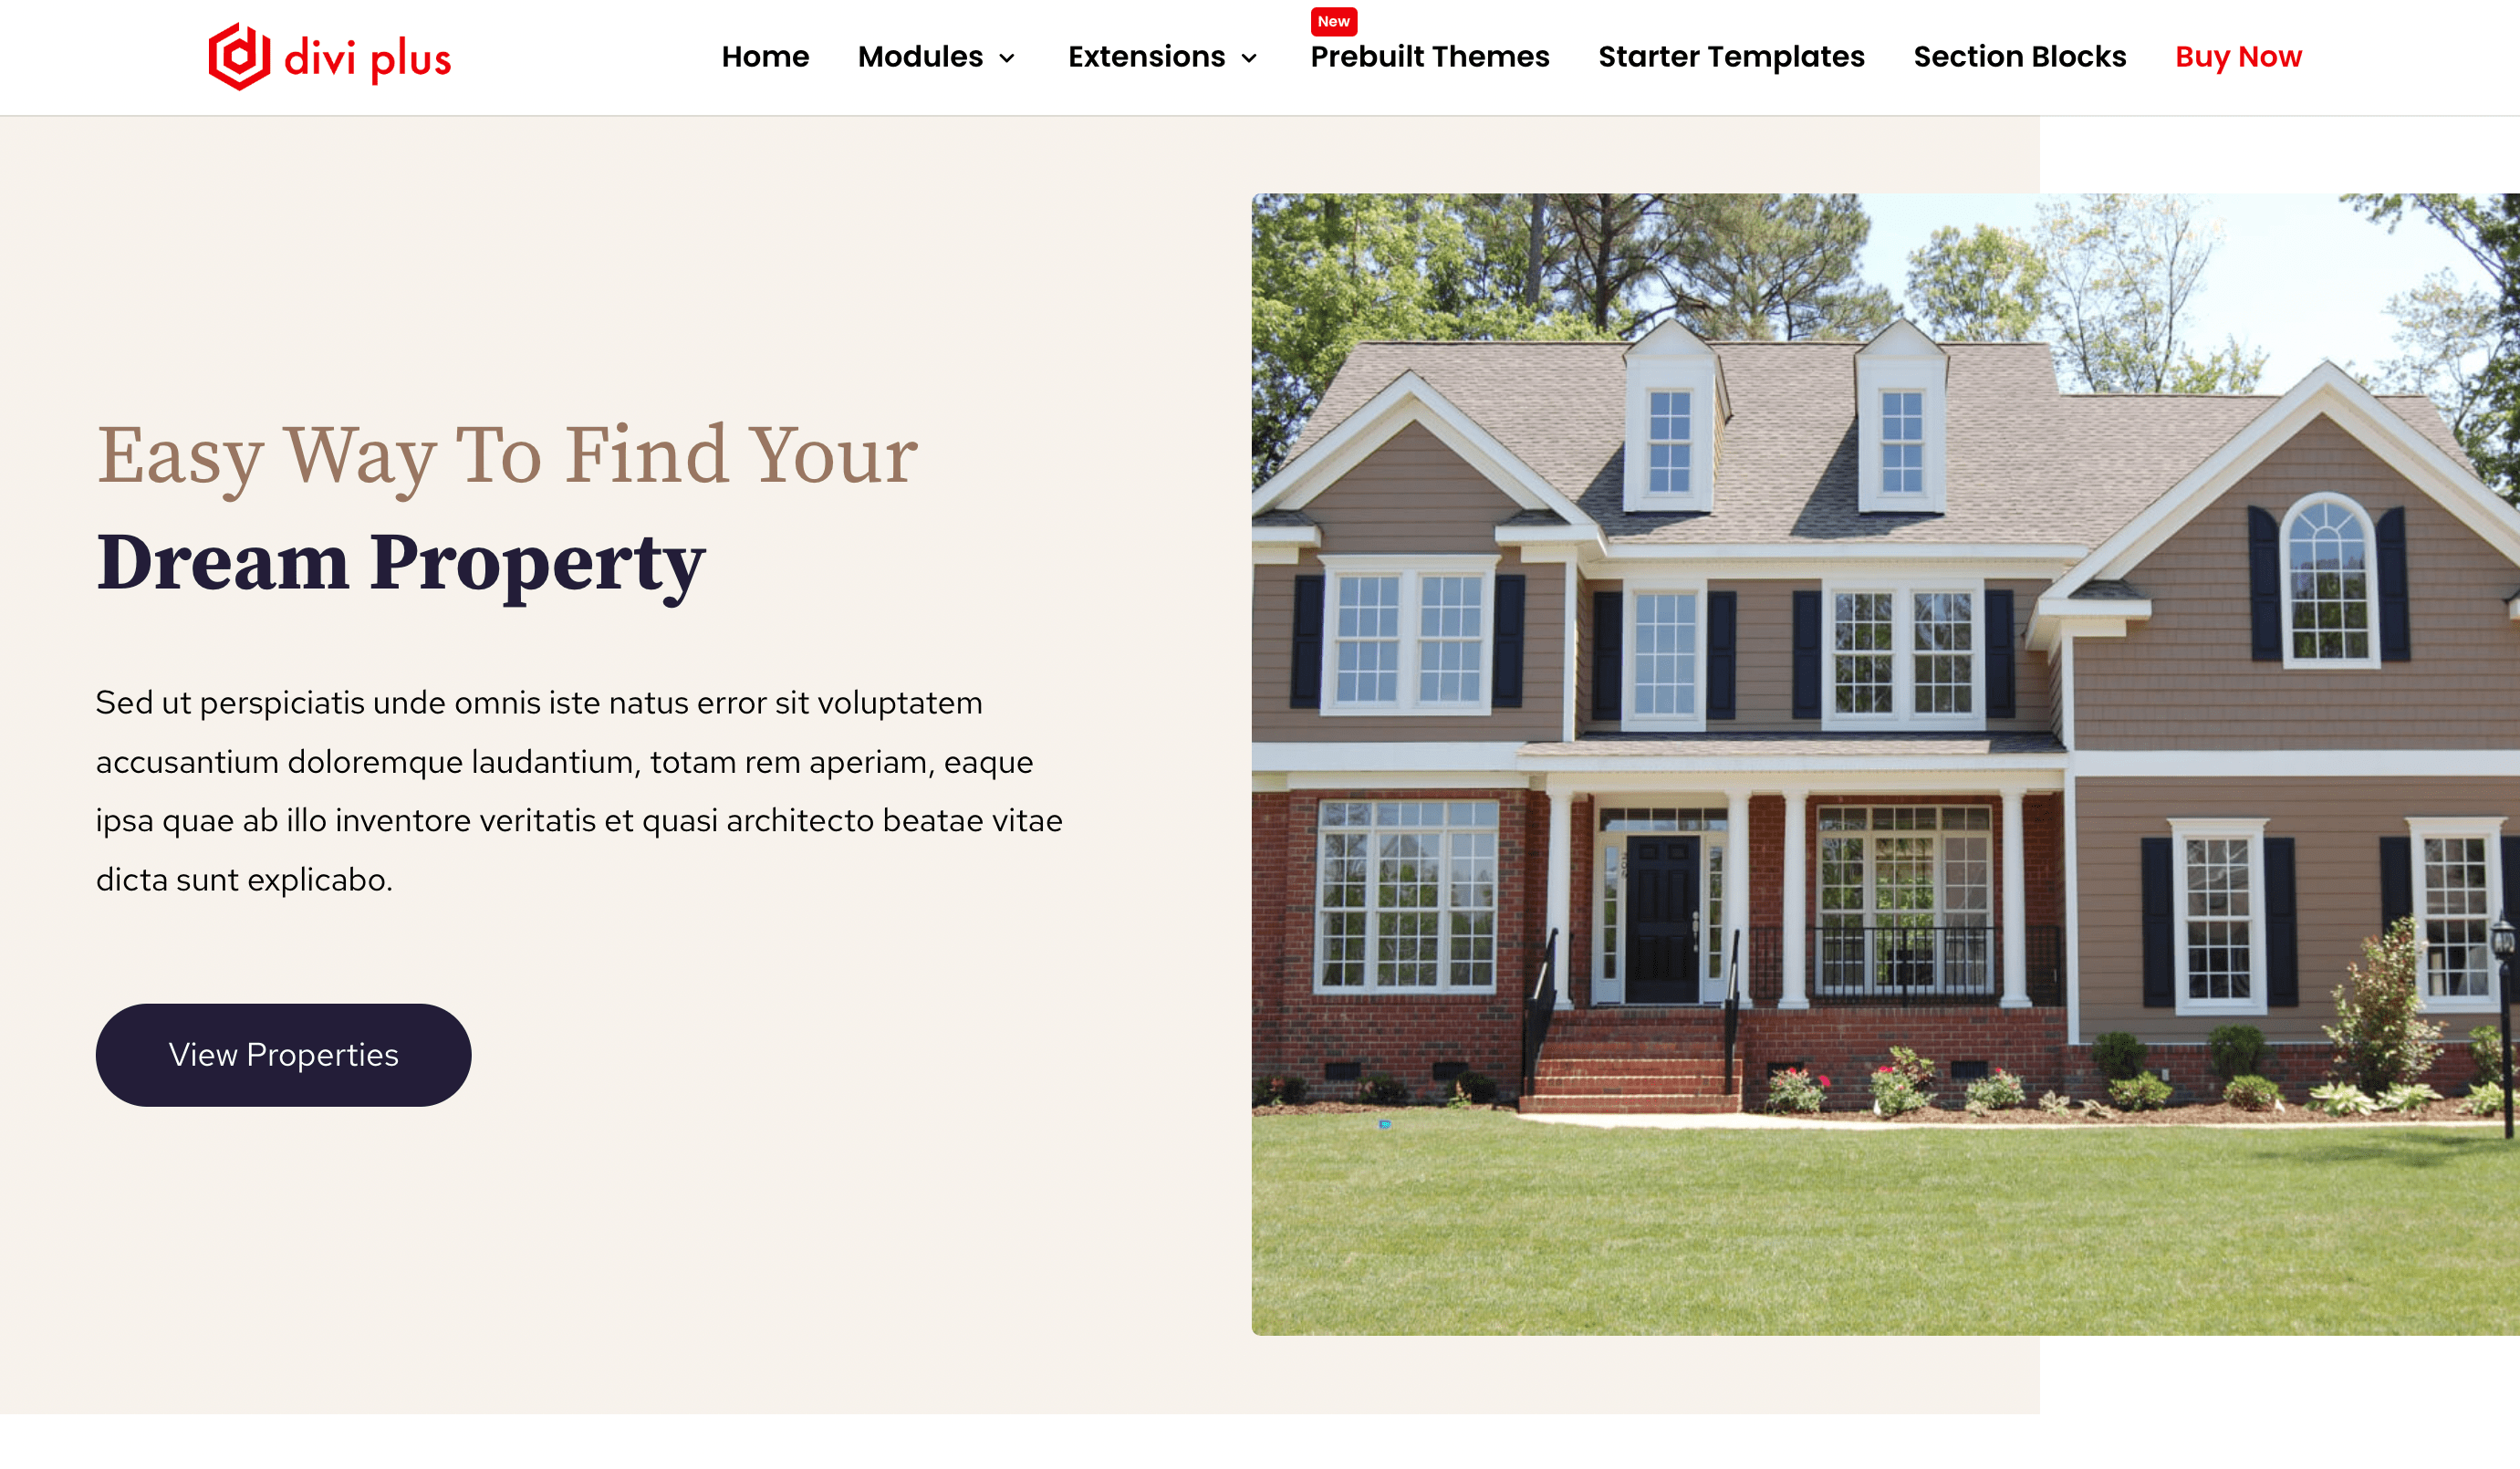 Divi Plus offers one of the best property management website templates.